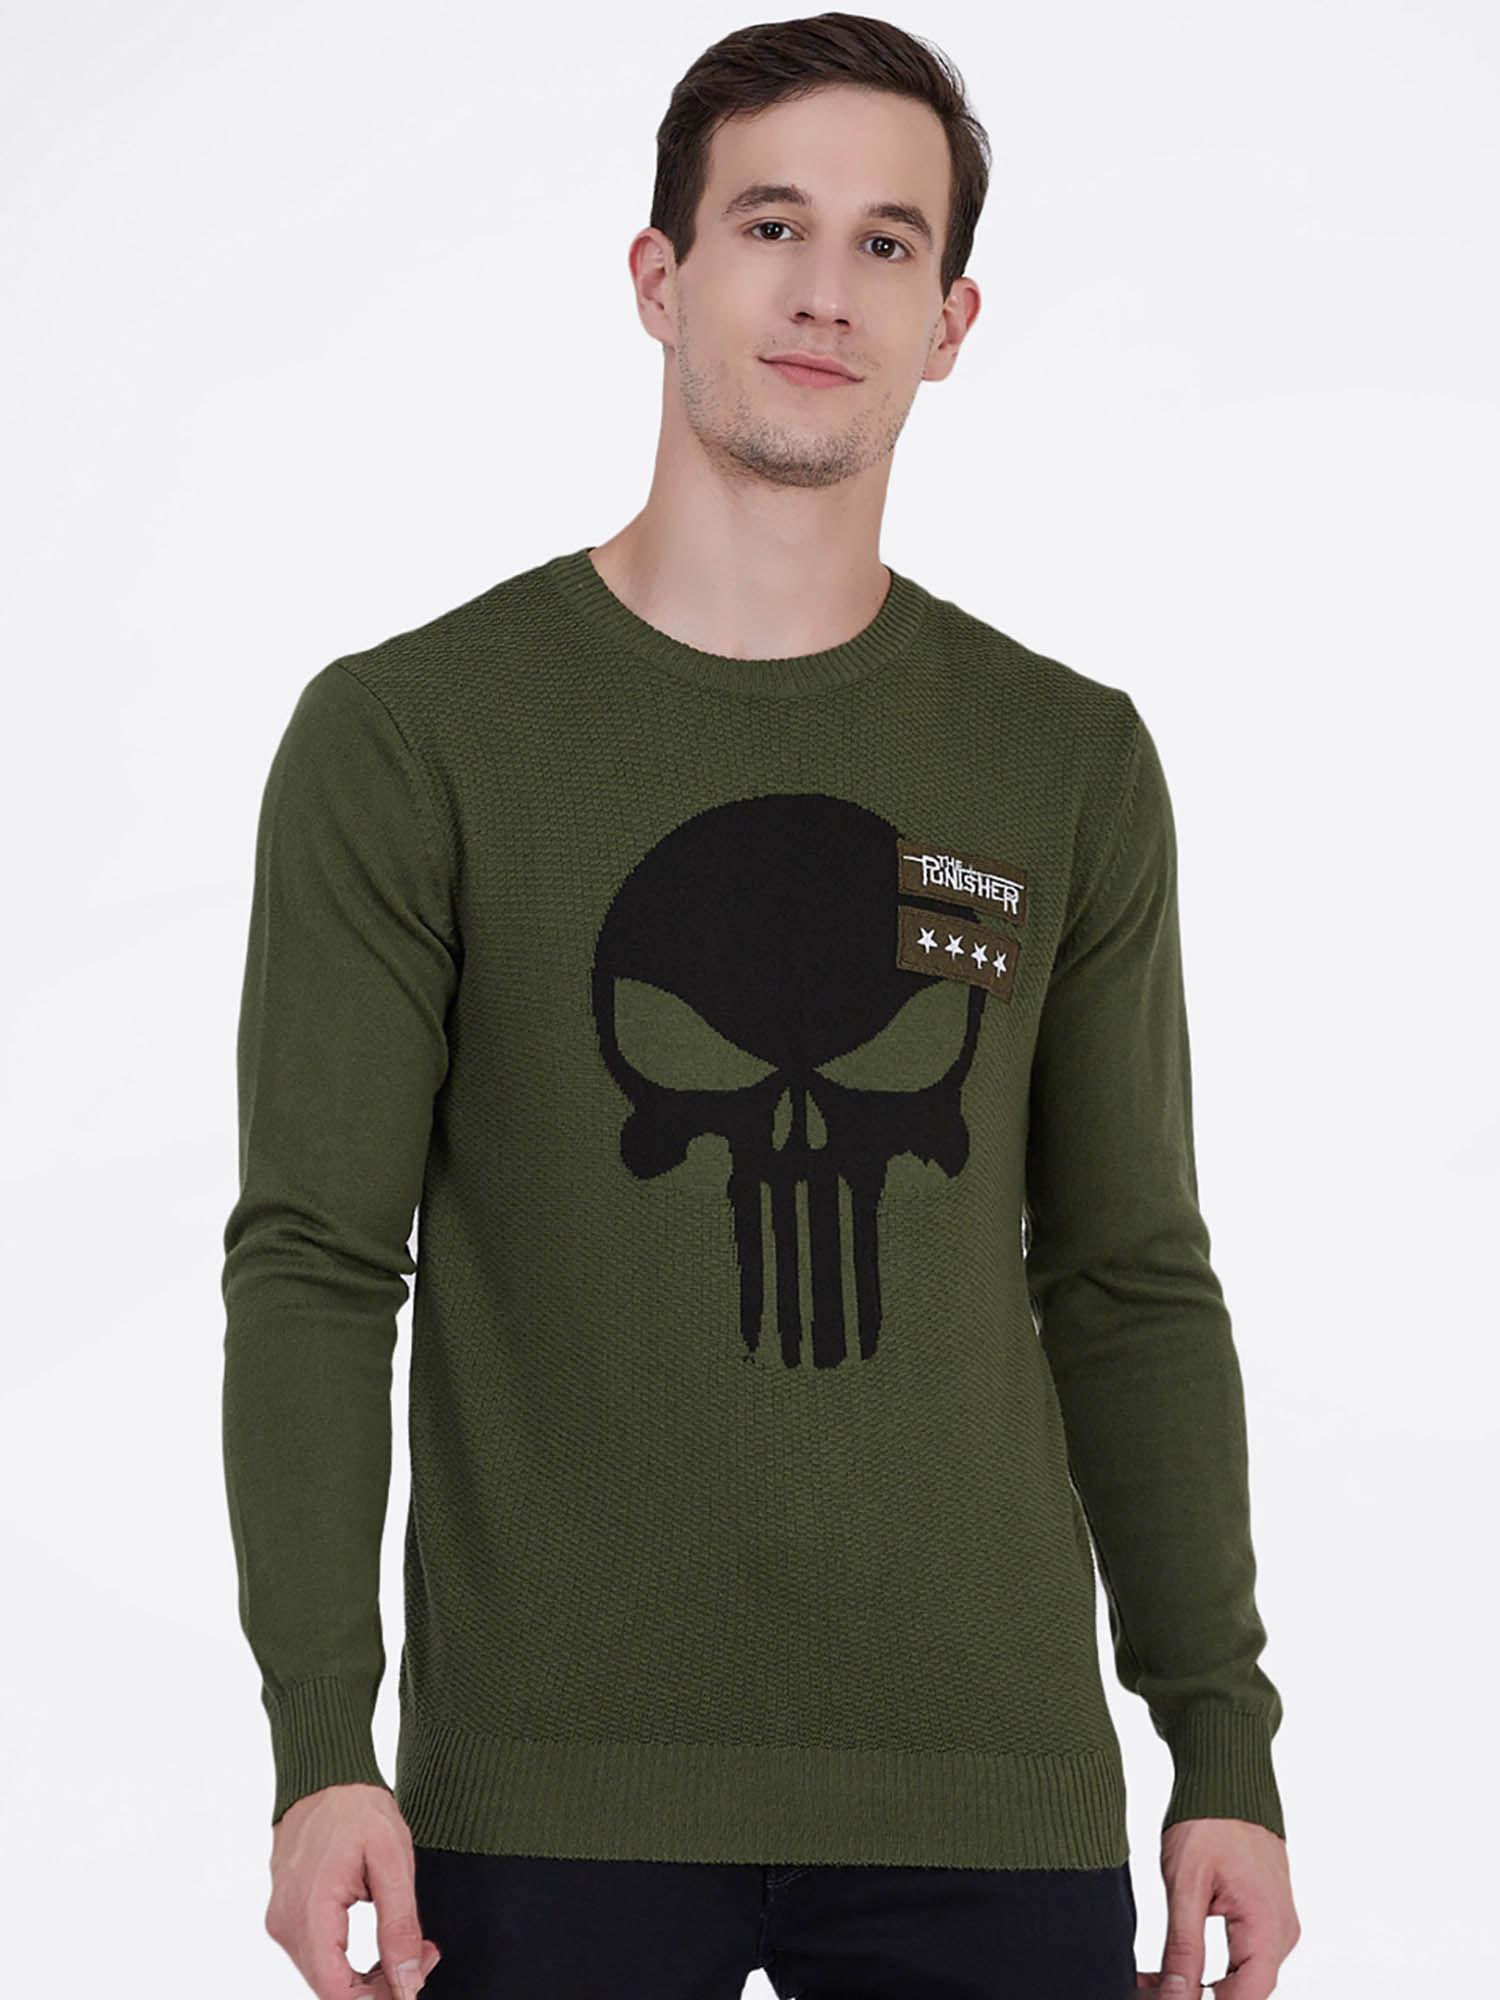 punisher printed sweater for young men